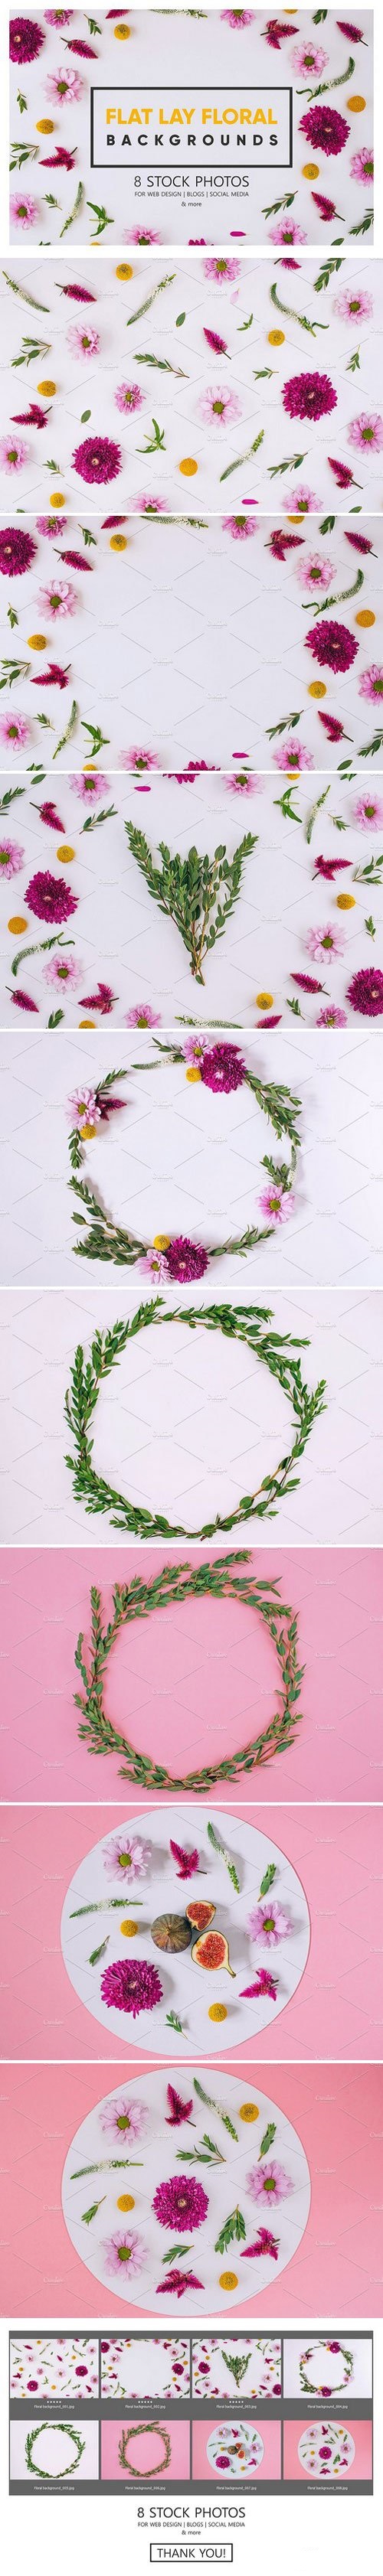 Flat lay floral Stock Photo 1815600